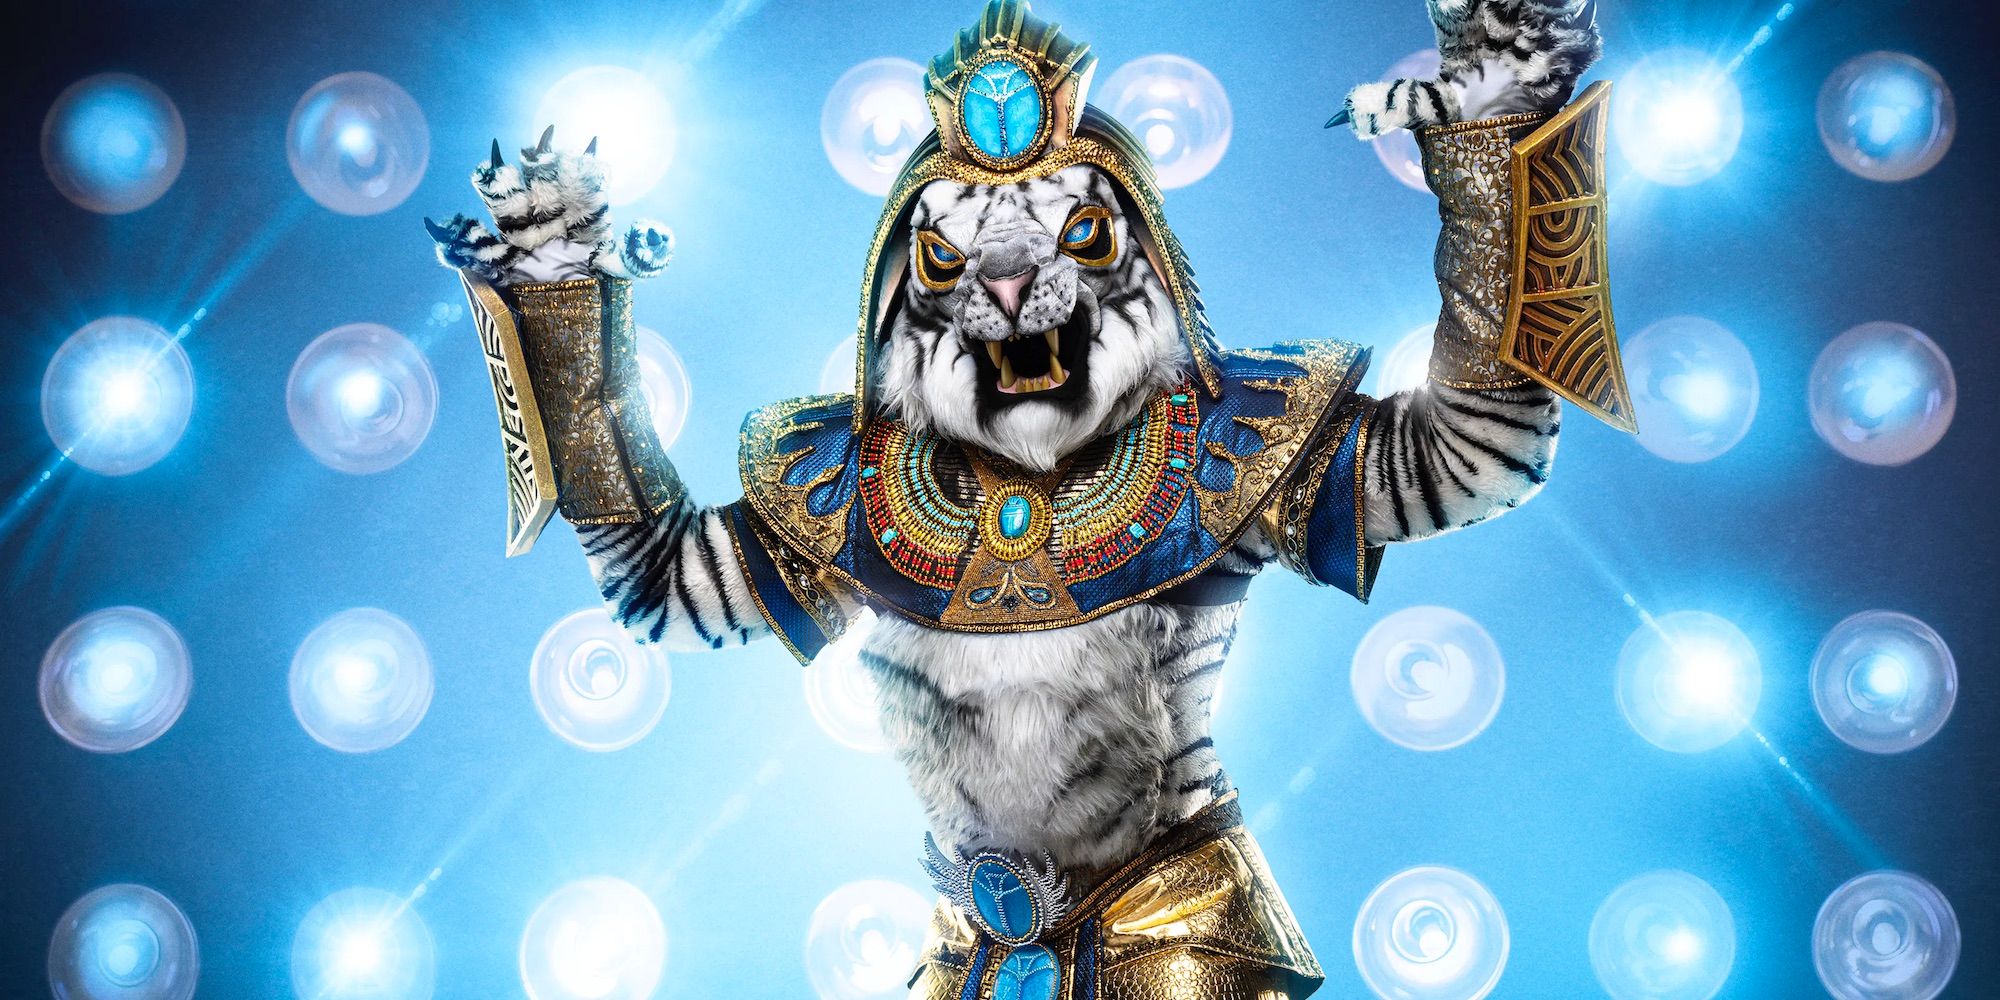 The White Tiger posing on his portrait for The Masked Singer